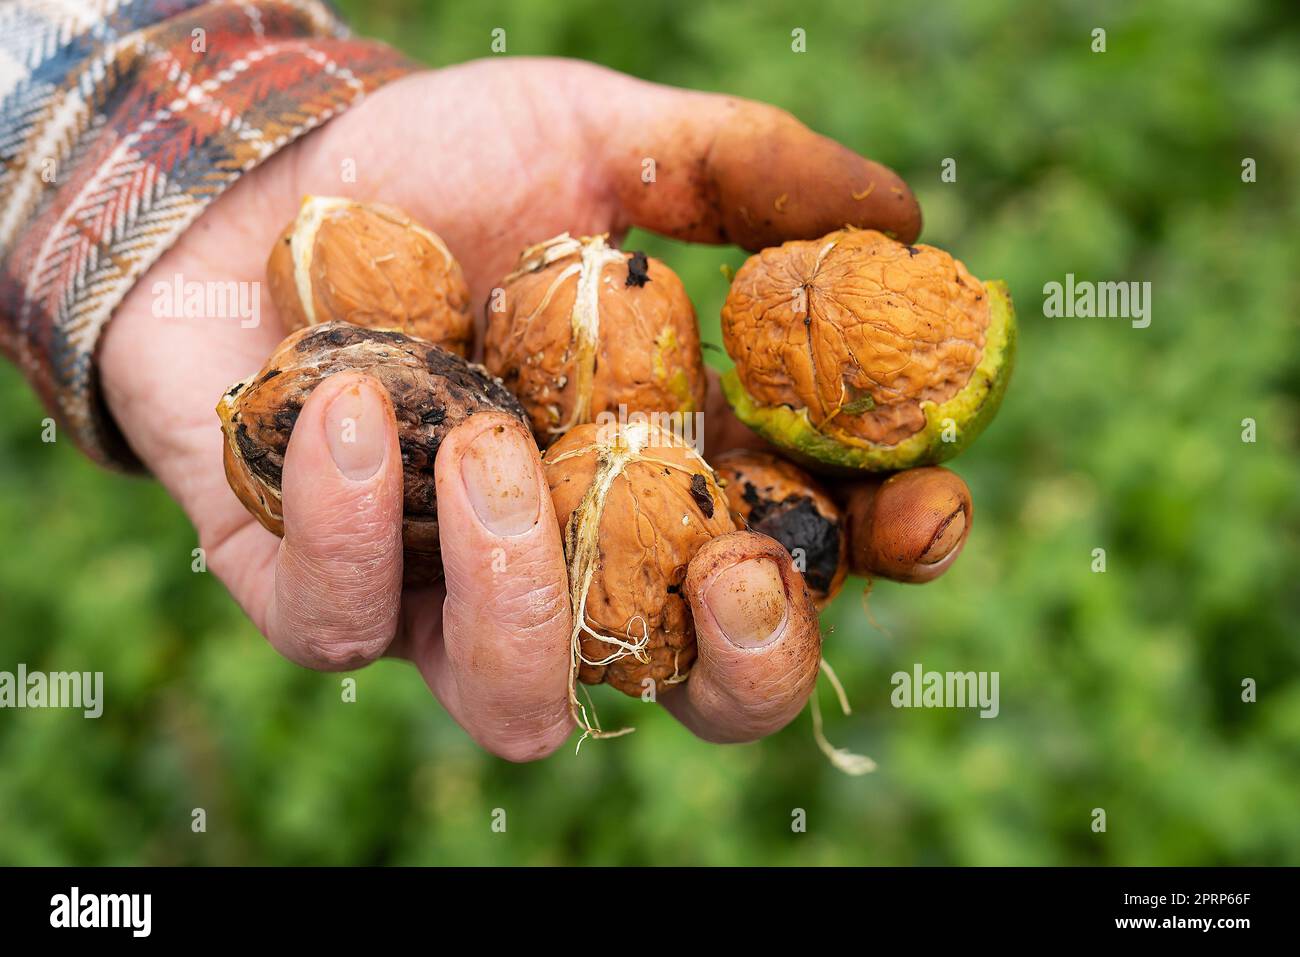 A man holds a whole walnut in his hands. Harvesting. Whole walnut, healthy organic food concept. Stock Photo